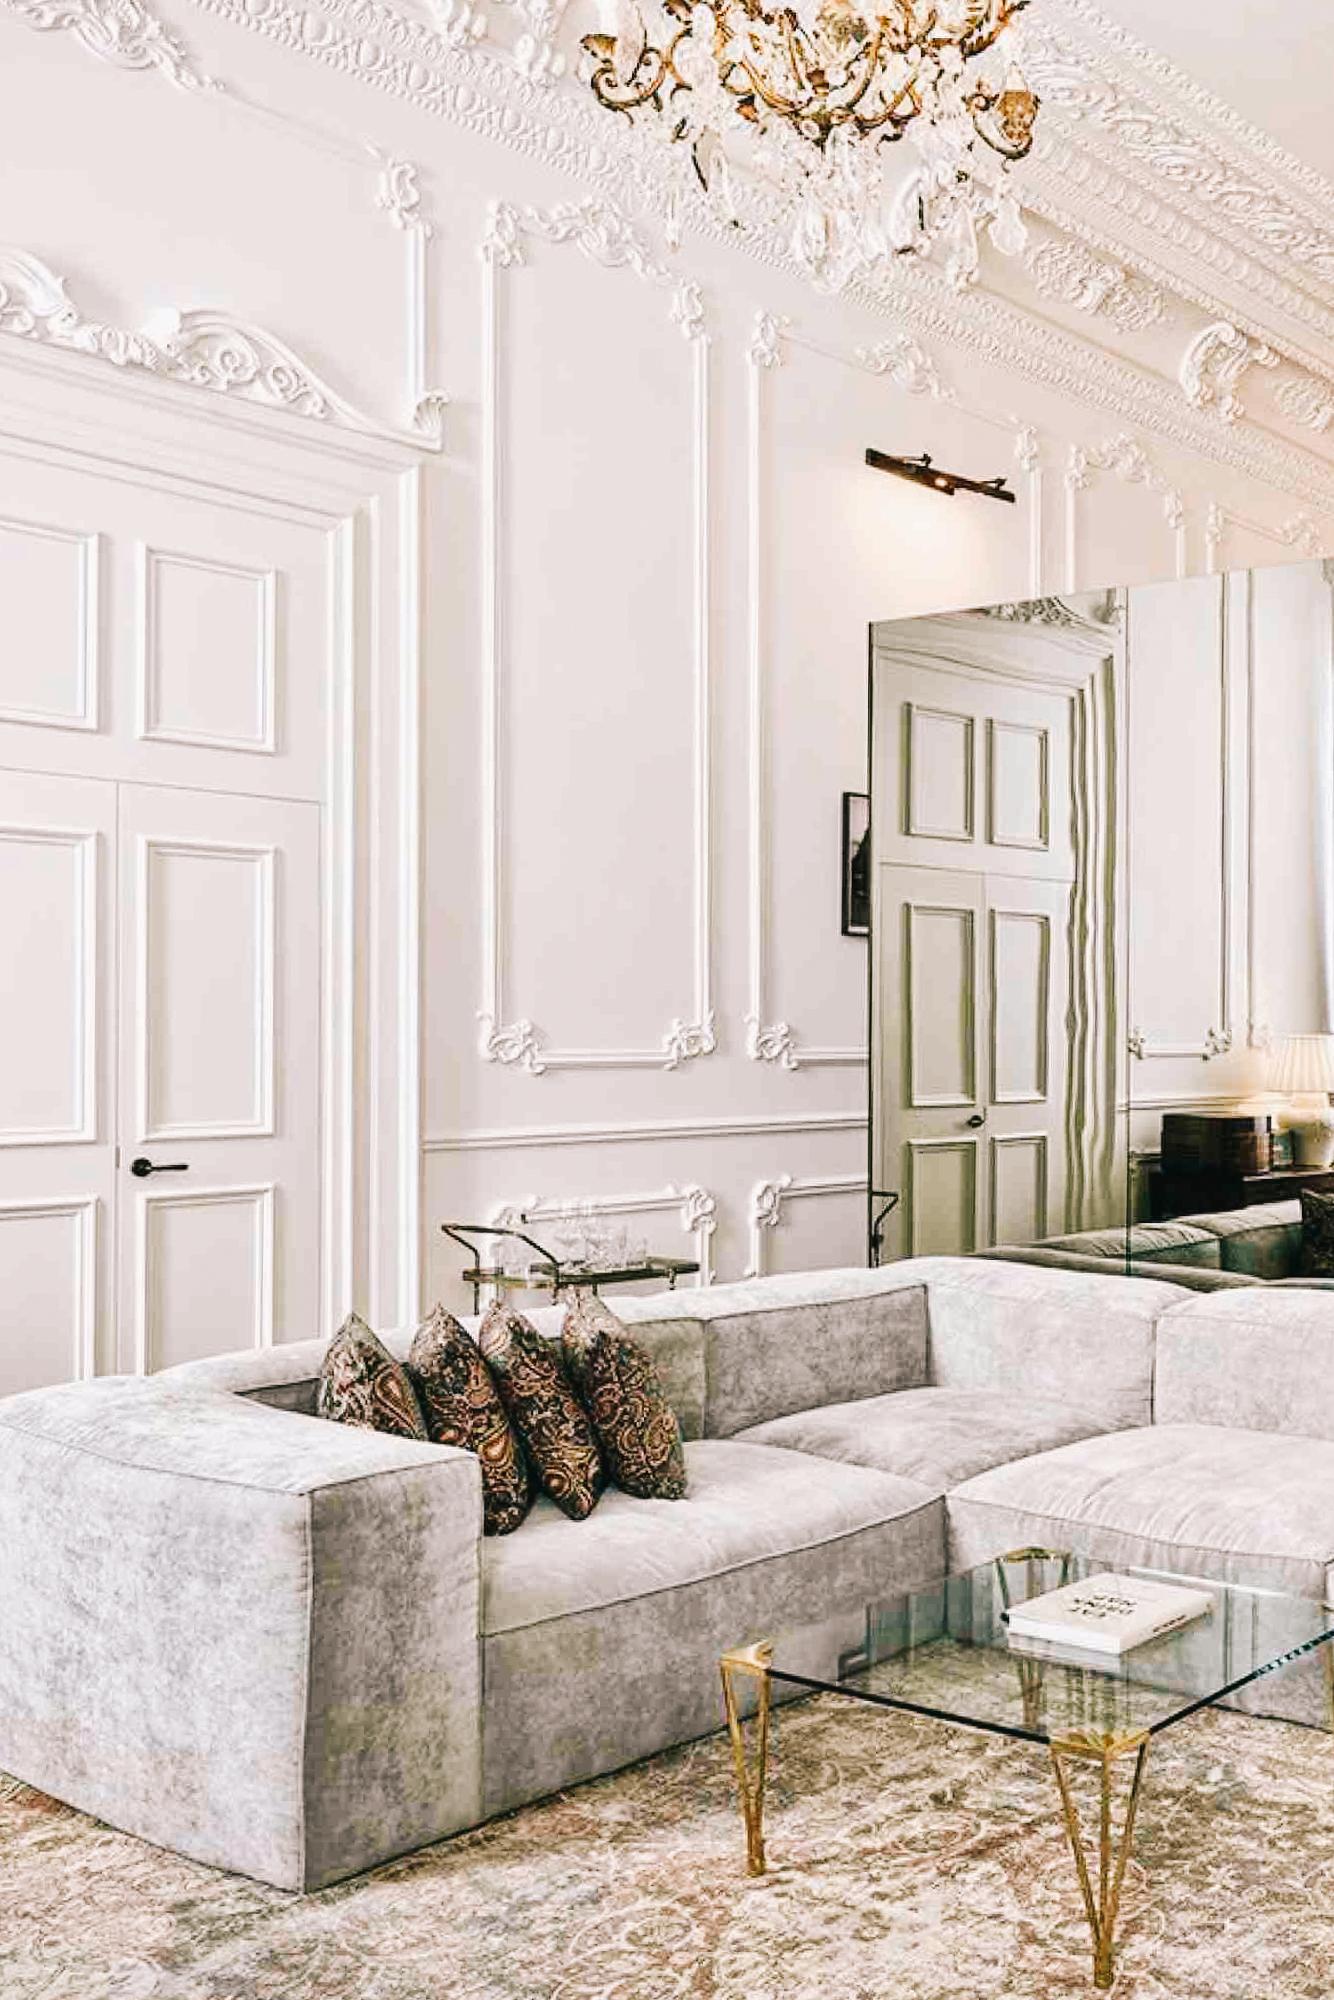 27 of the Most Glamorous Luxury Hotels Around the World